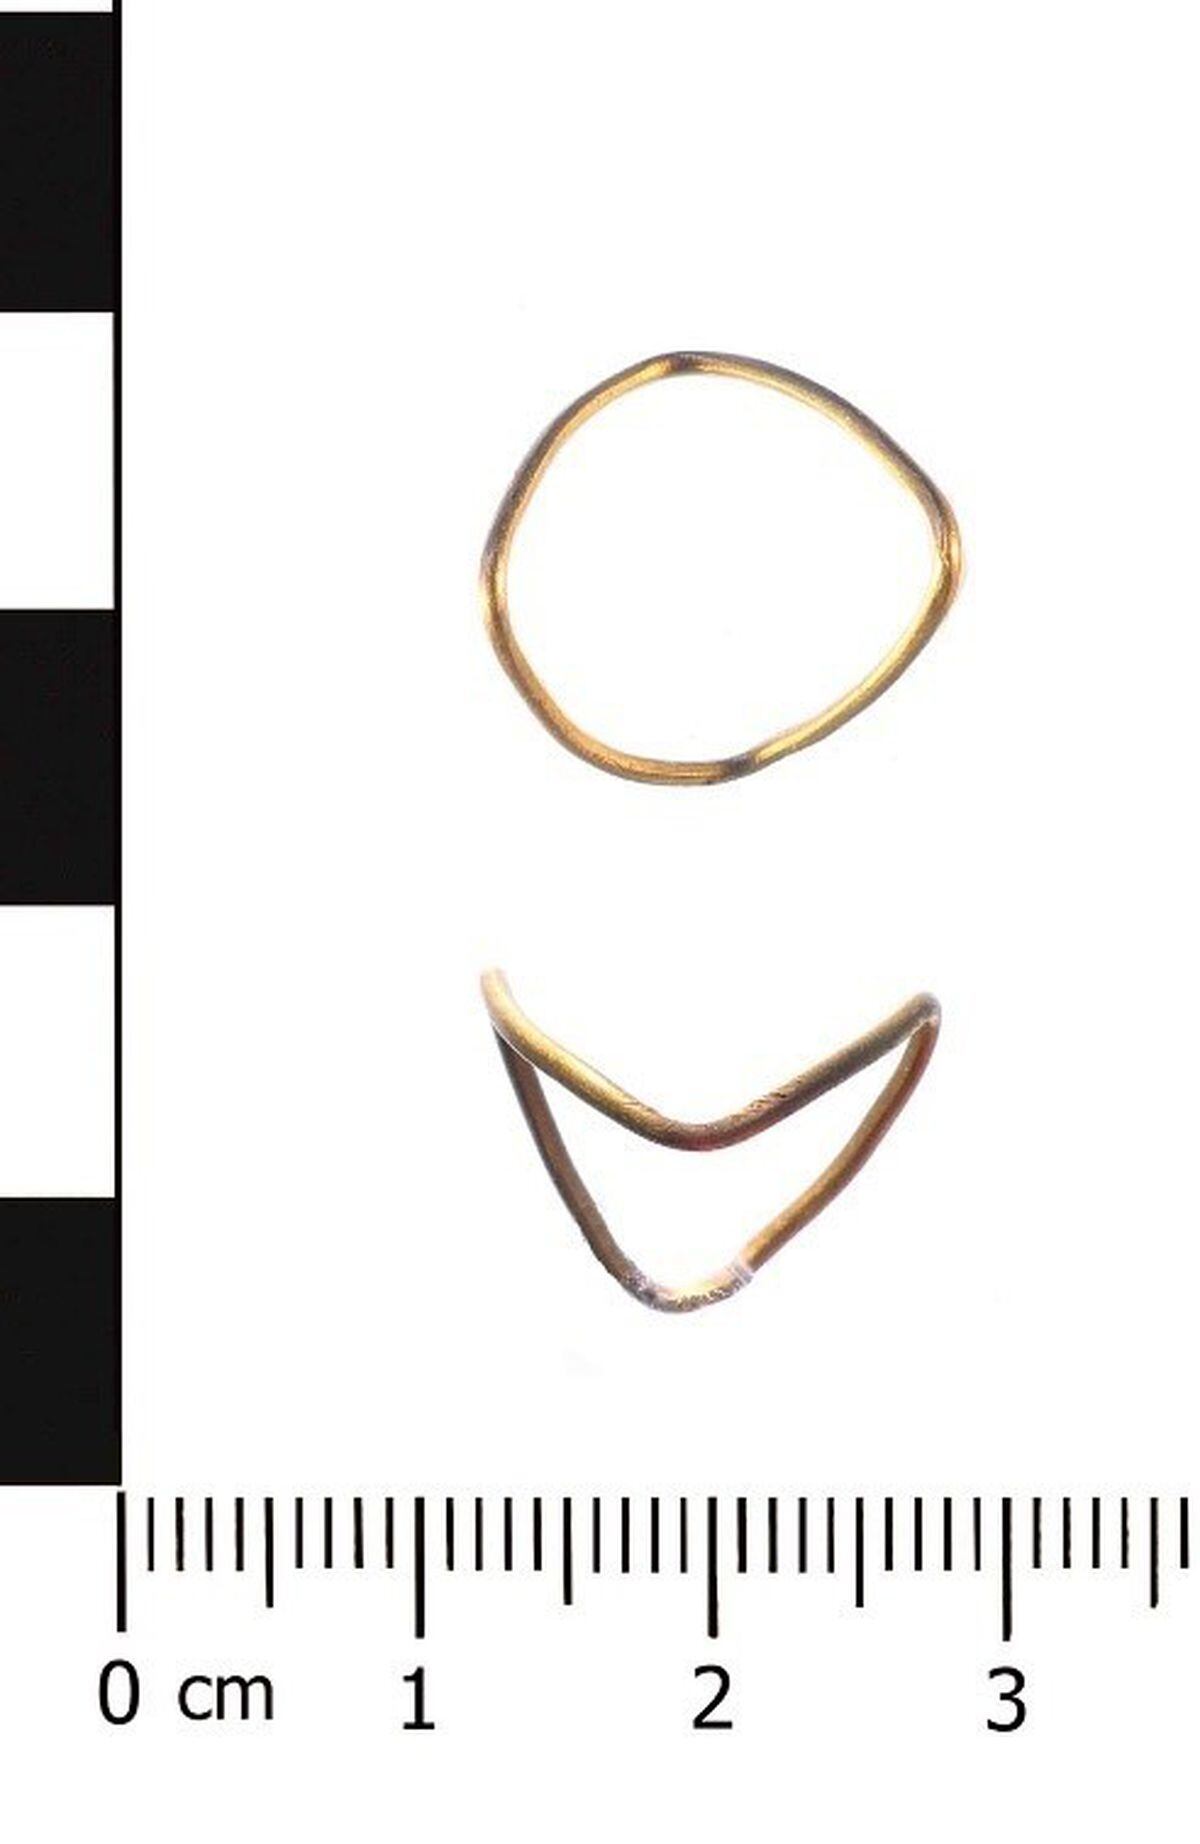 Iron Age ring found in Frodesley